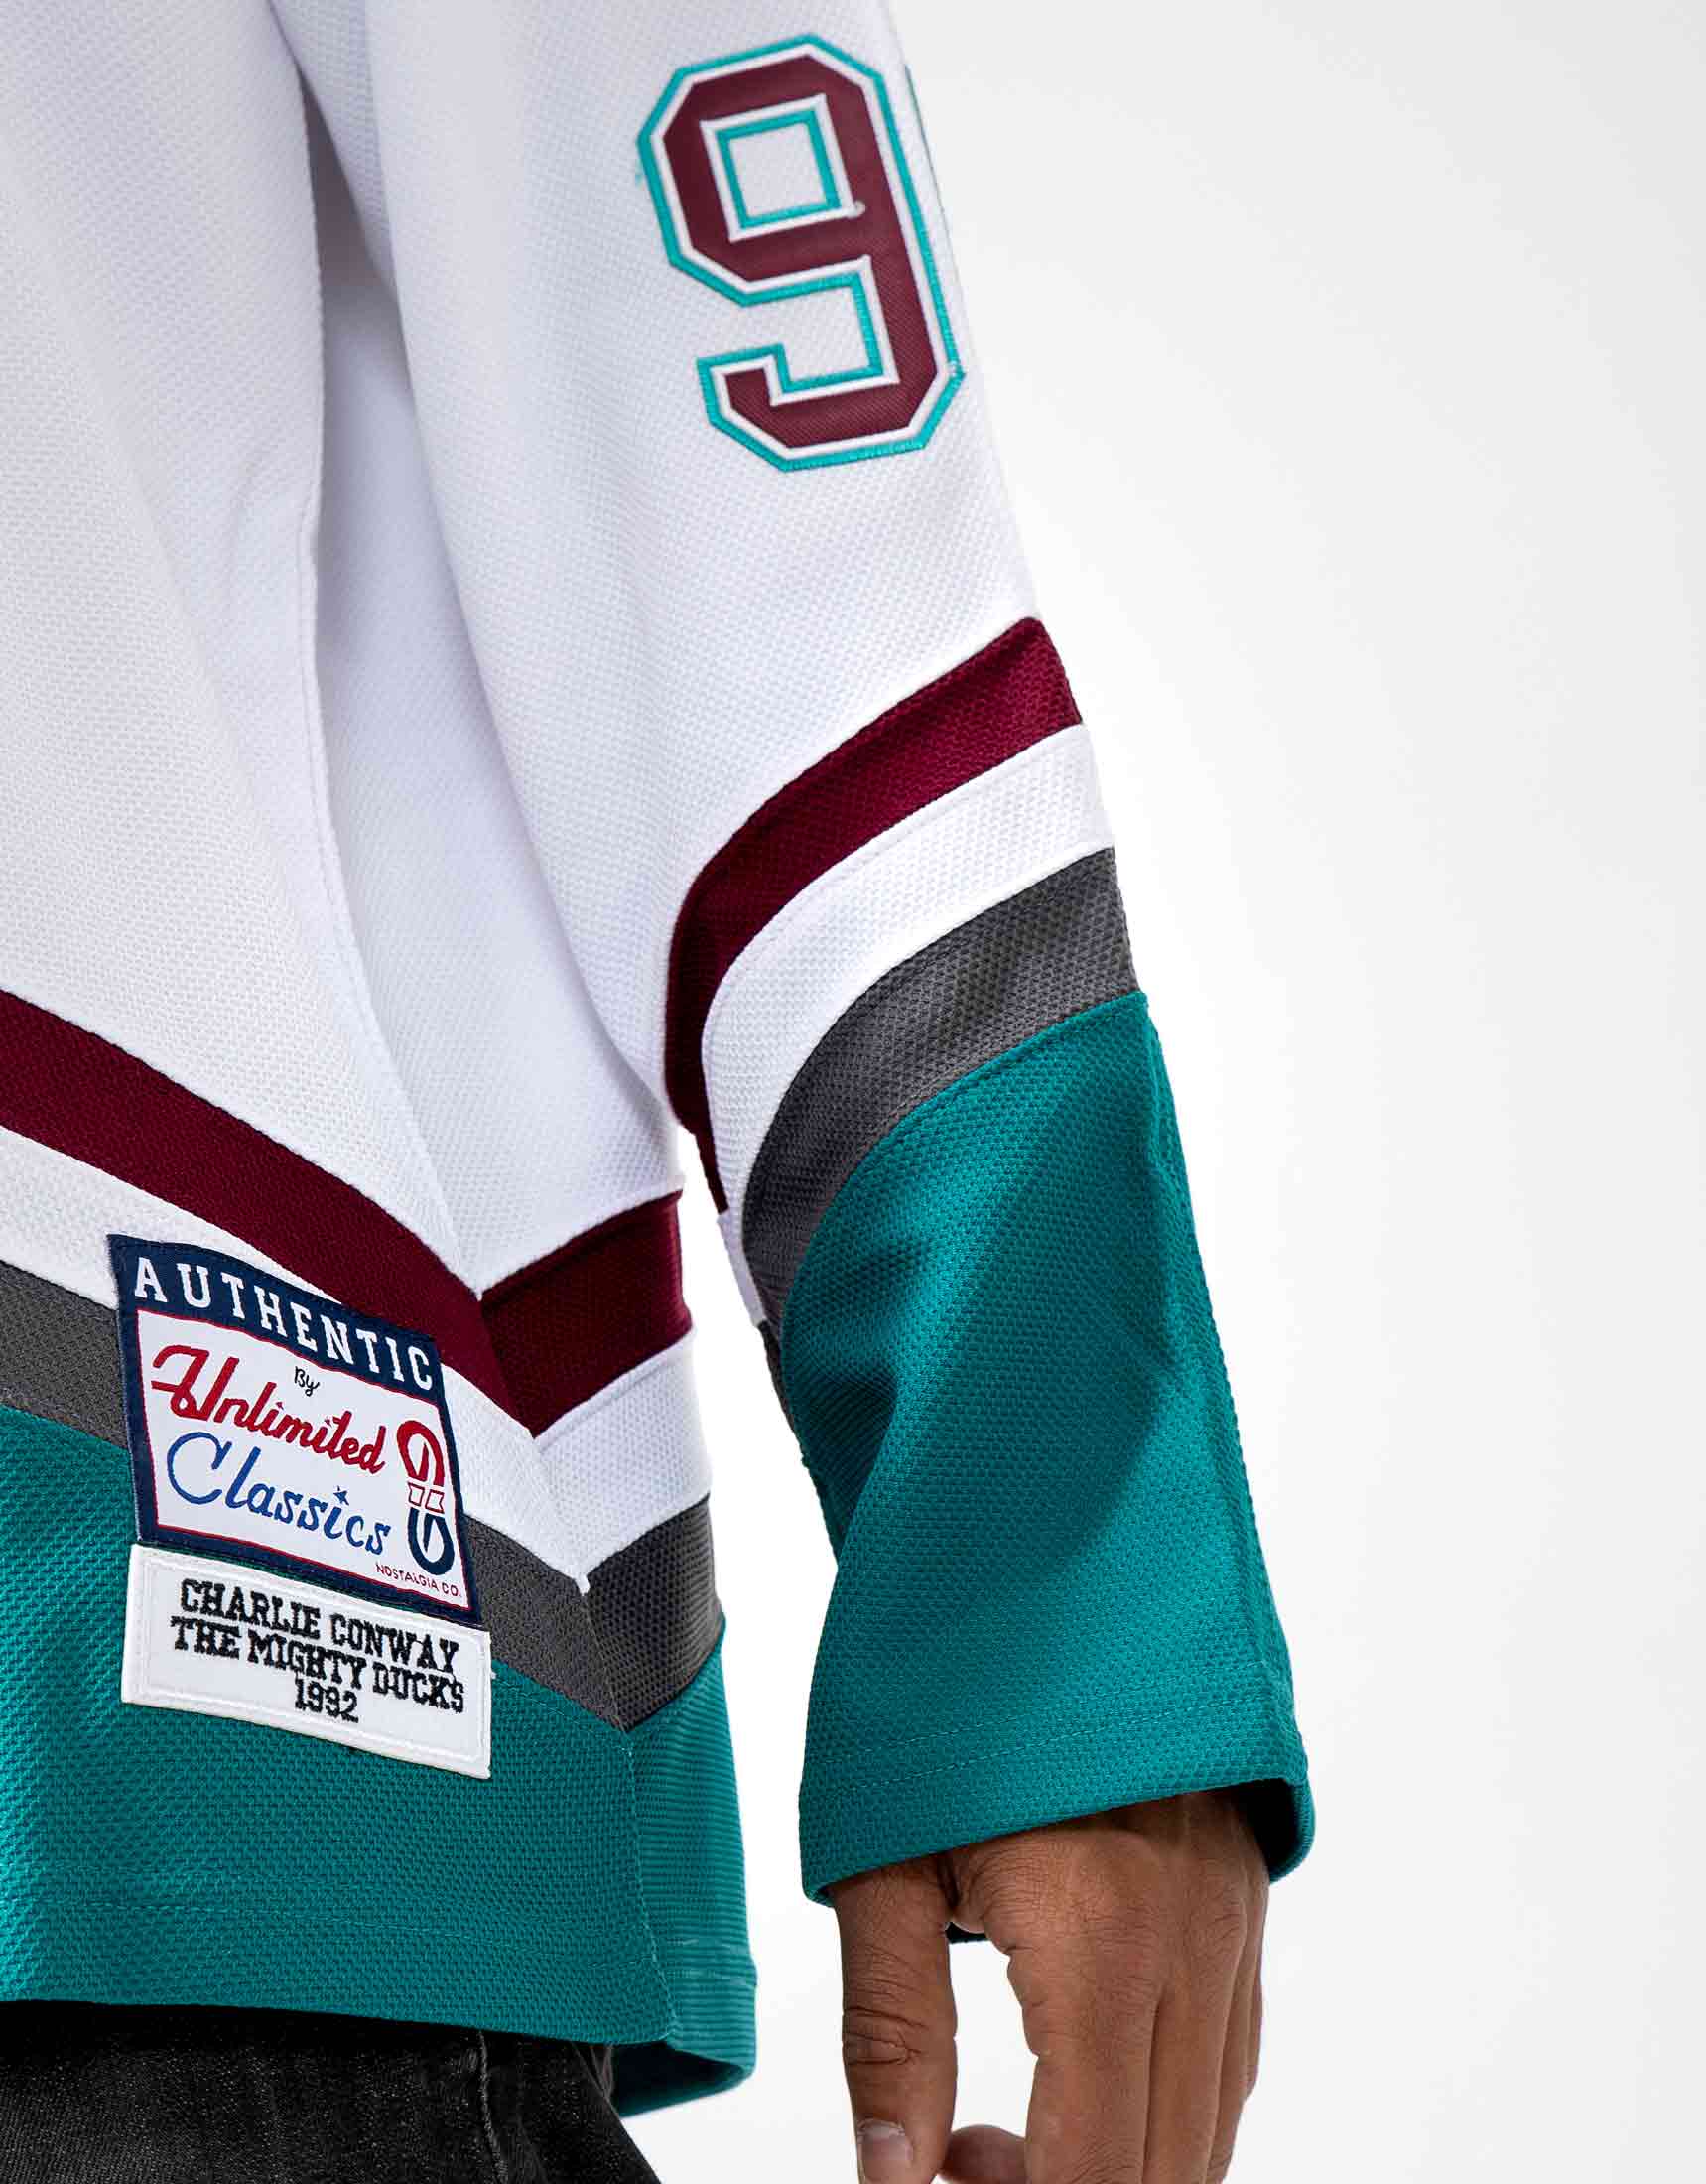 Charlie Conway Mighty Ducks Jersey 96 Movie Ice Hockey Jersey Sport Sweater Stitched Letters Numbers S-XXXL White 